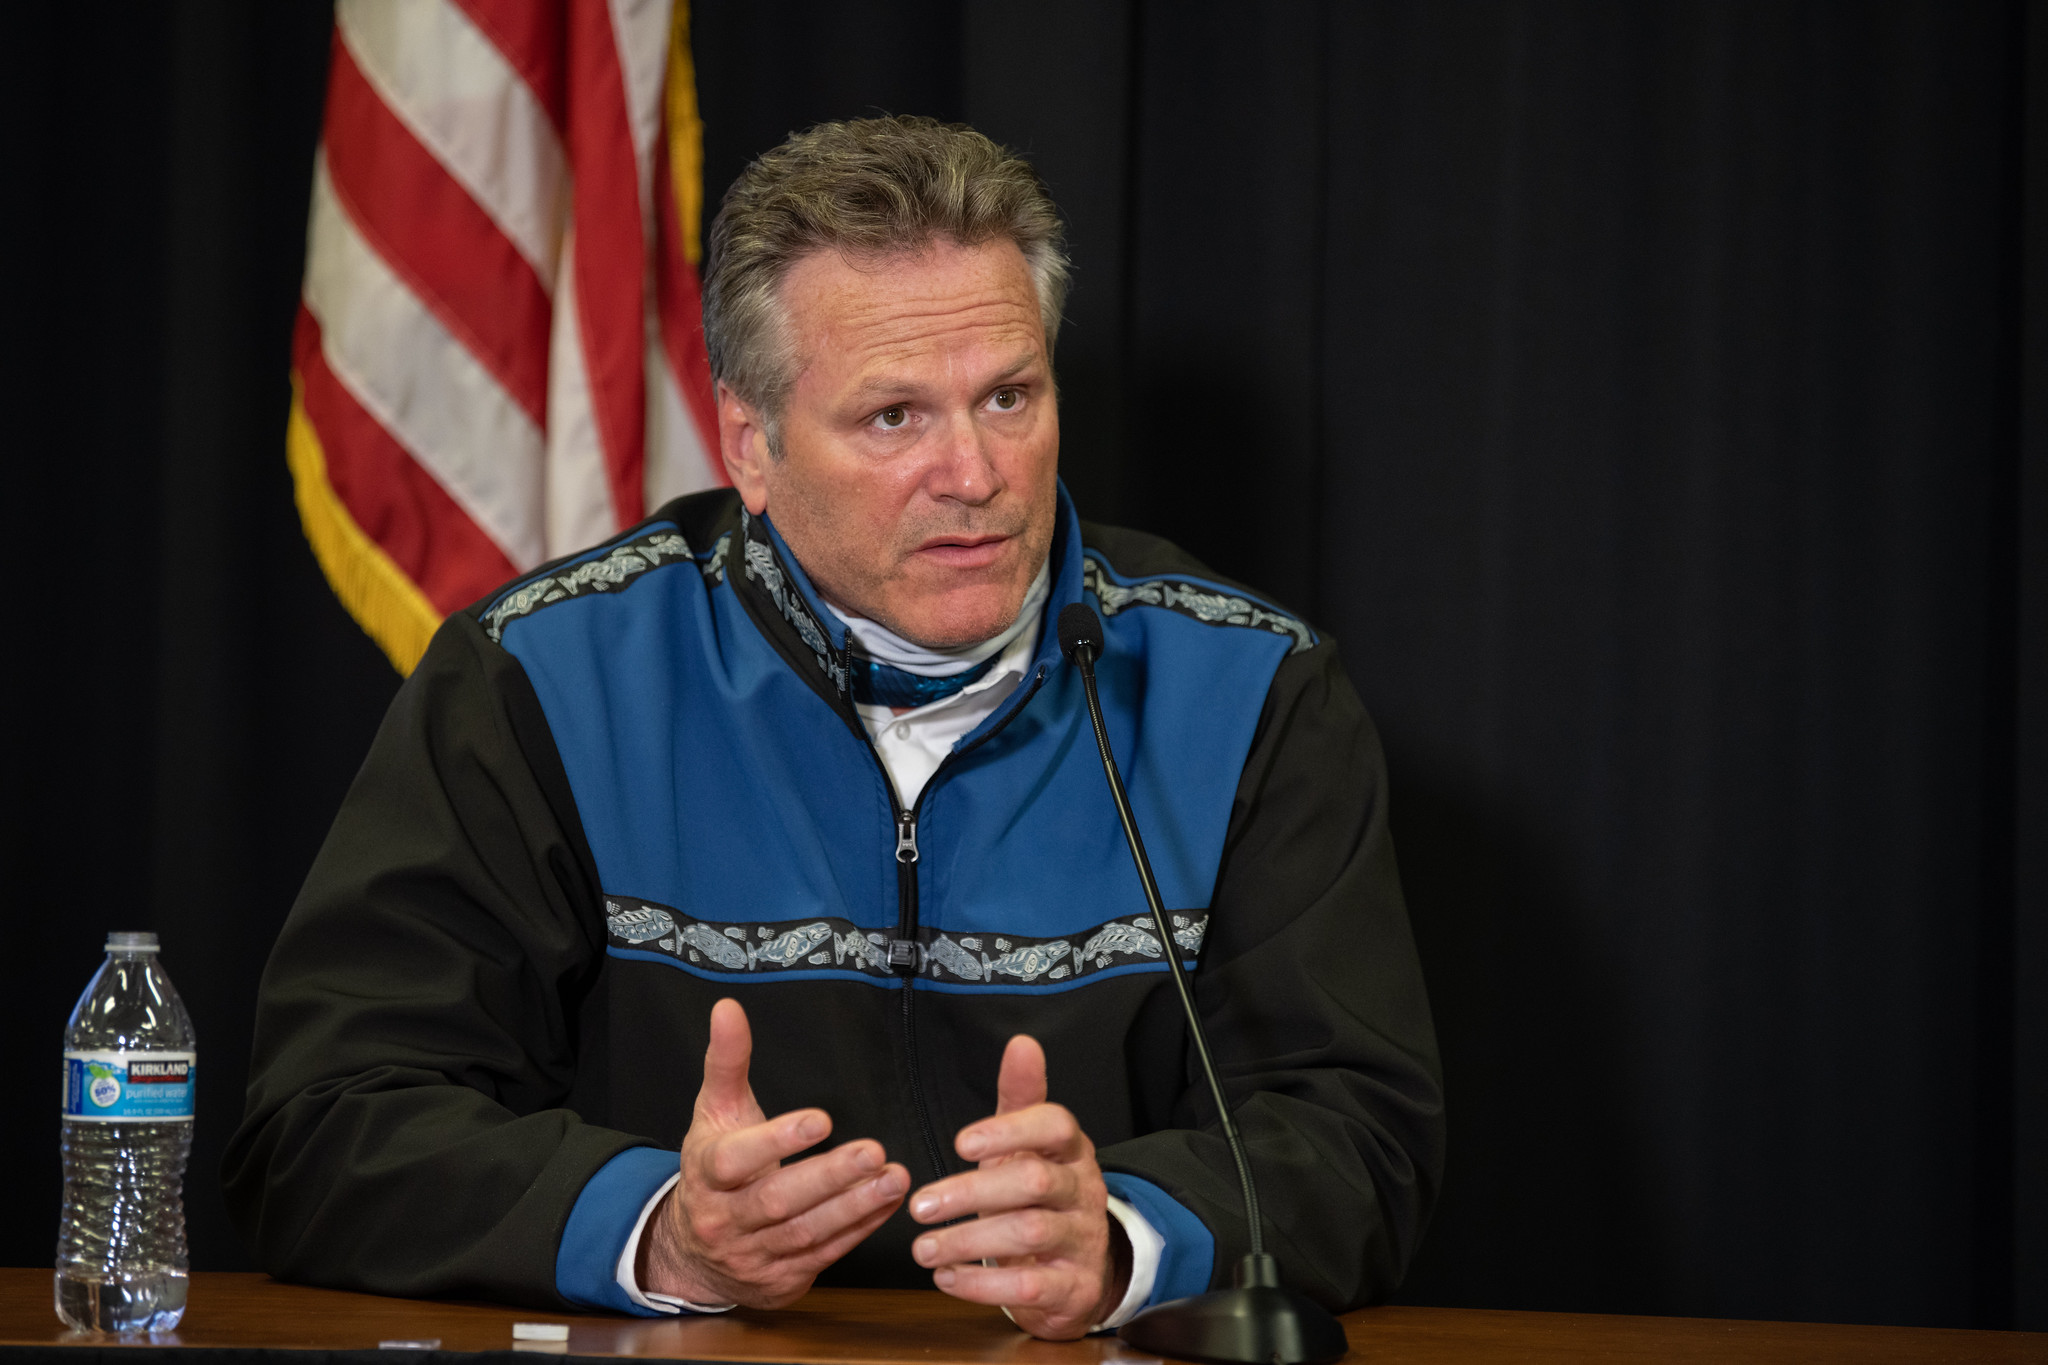 Alaskan Governor Mike Dunleavy tests positive for COVID-19